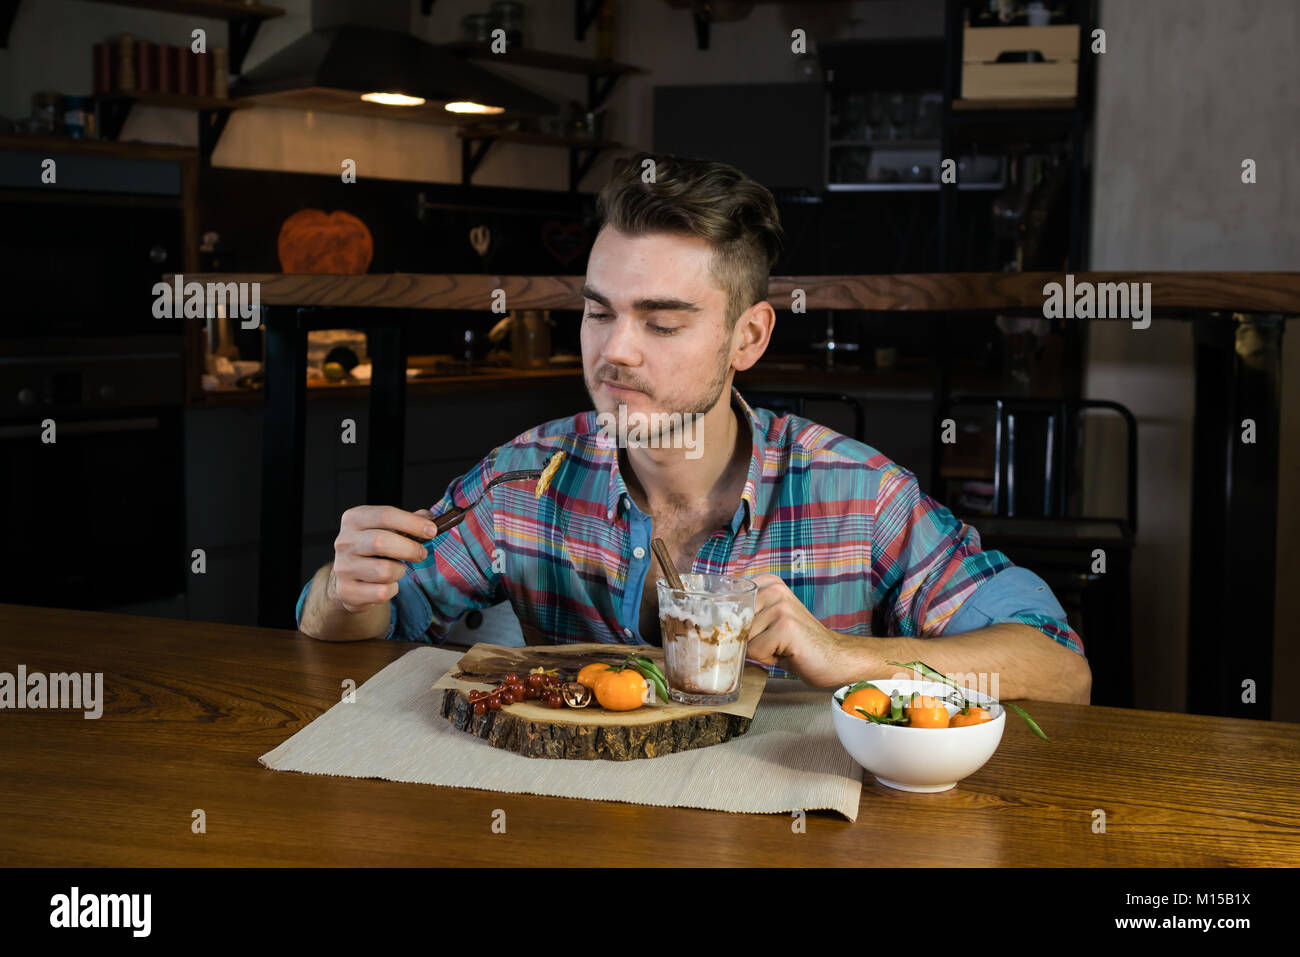 Funny hungry person eats pancakes on the breakfast. Young man sits at the table in the stylish home kitchen. The meal close to over. Stock Photo